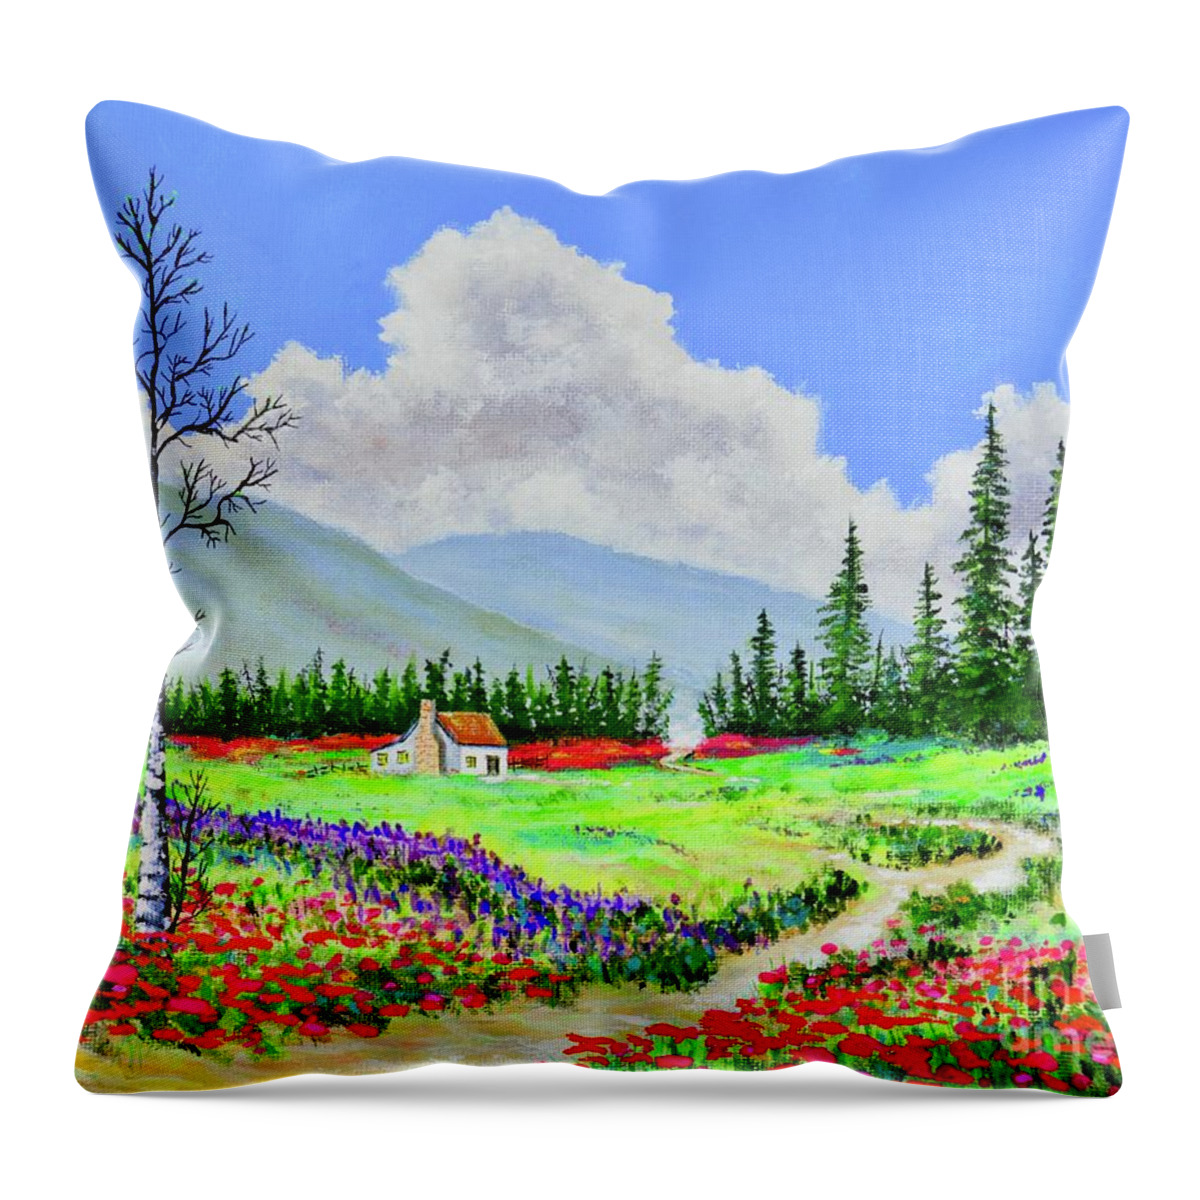 Flowers Throw Pillow featuring the painting Mountain Flowers by Mary Scott